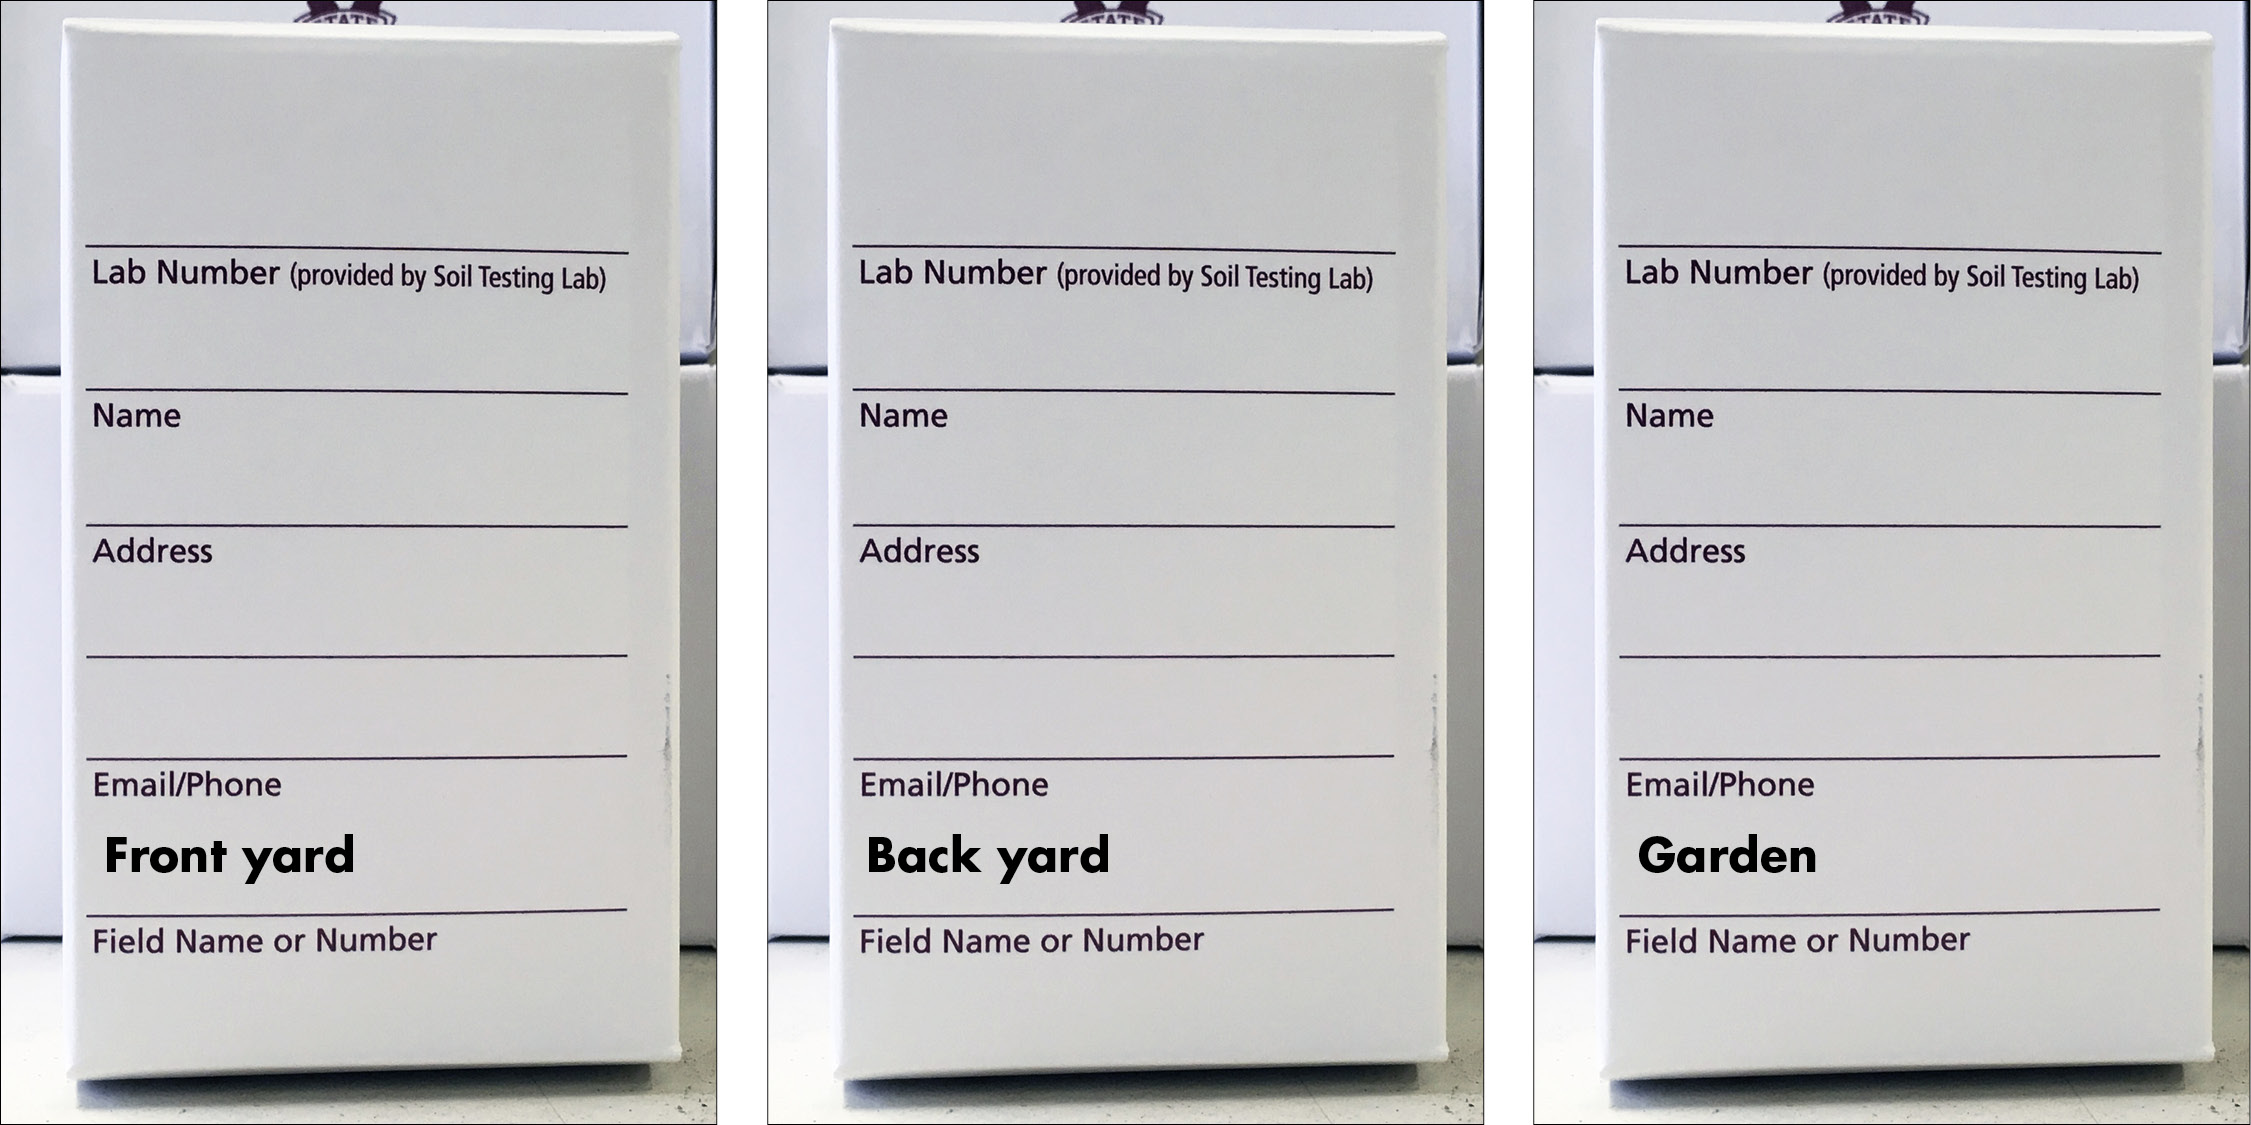 Three soil sample boxes labeled "front yard," "back yard," and "garden."